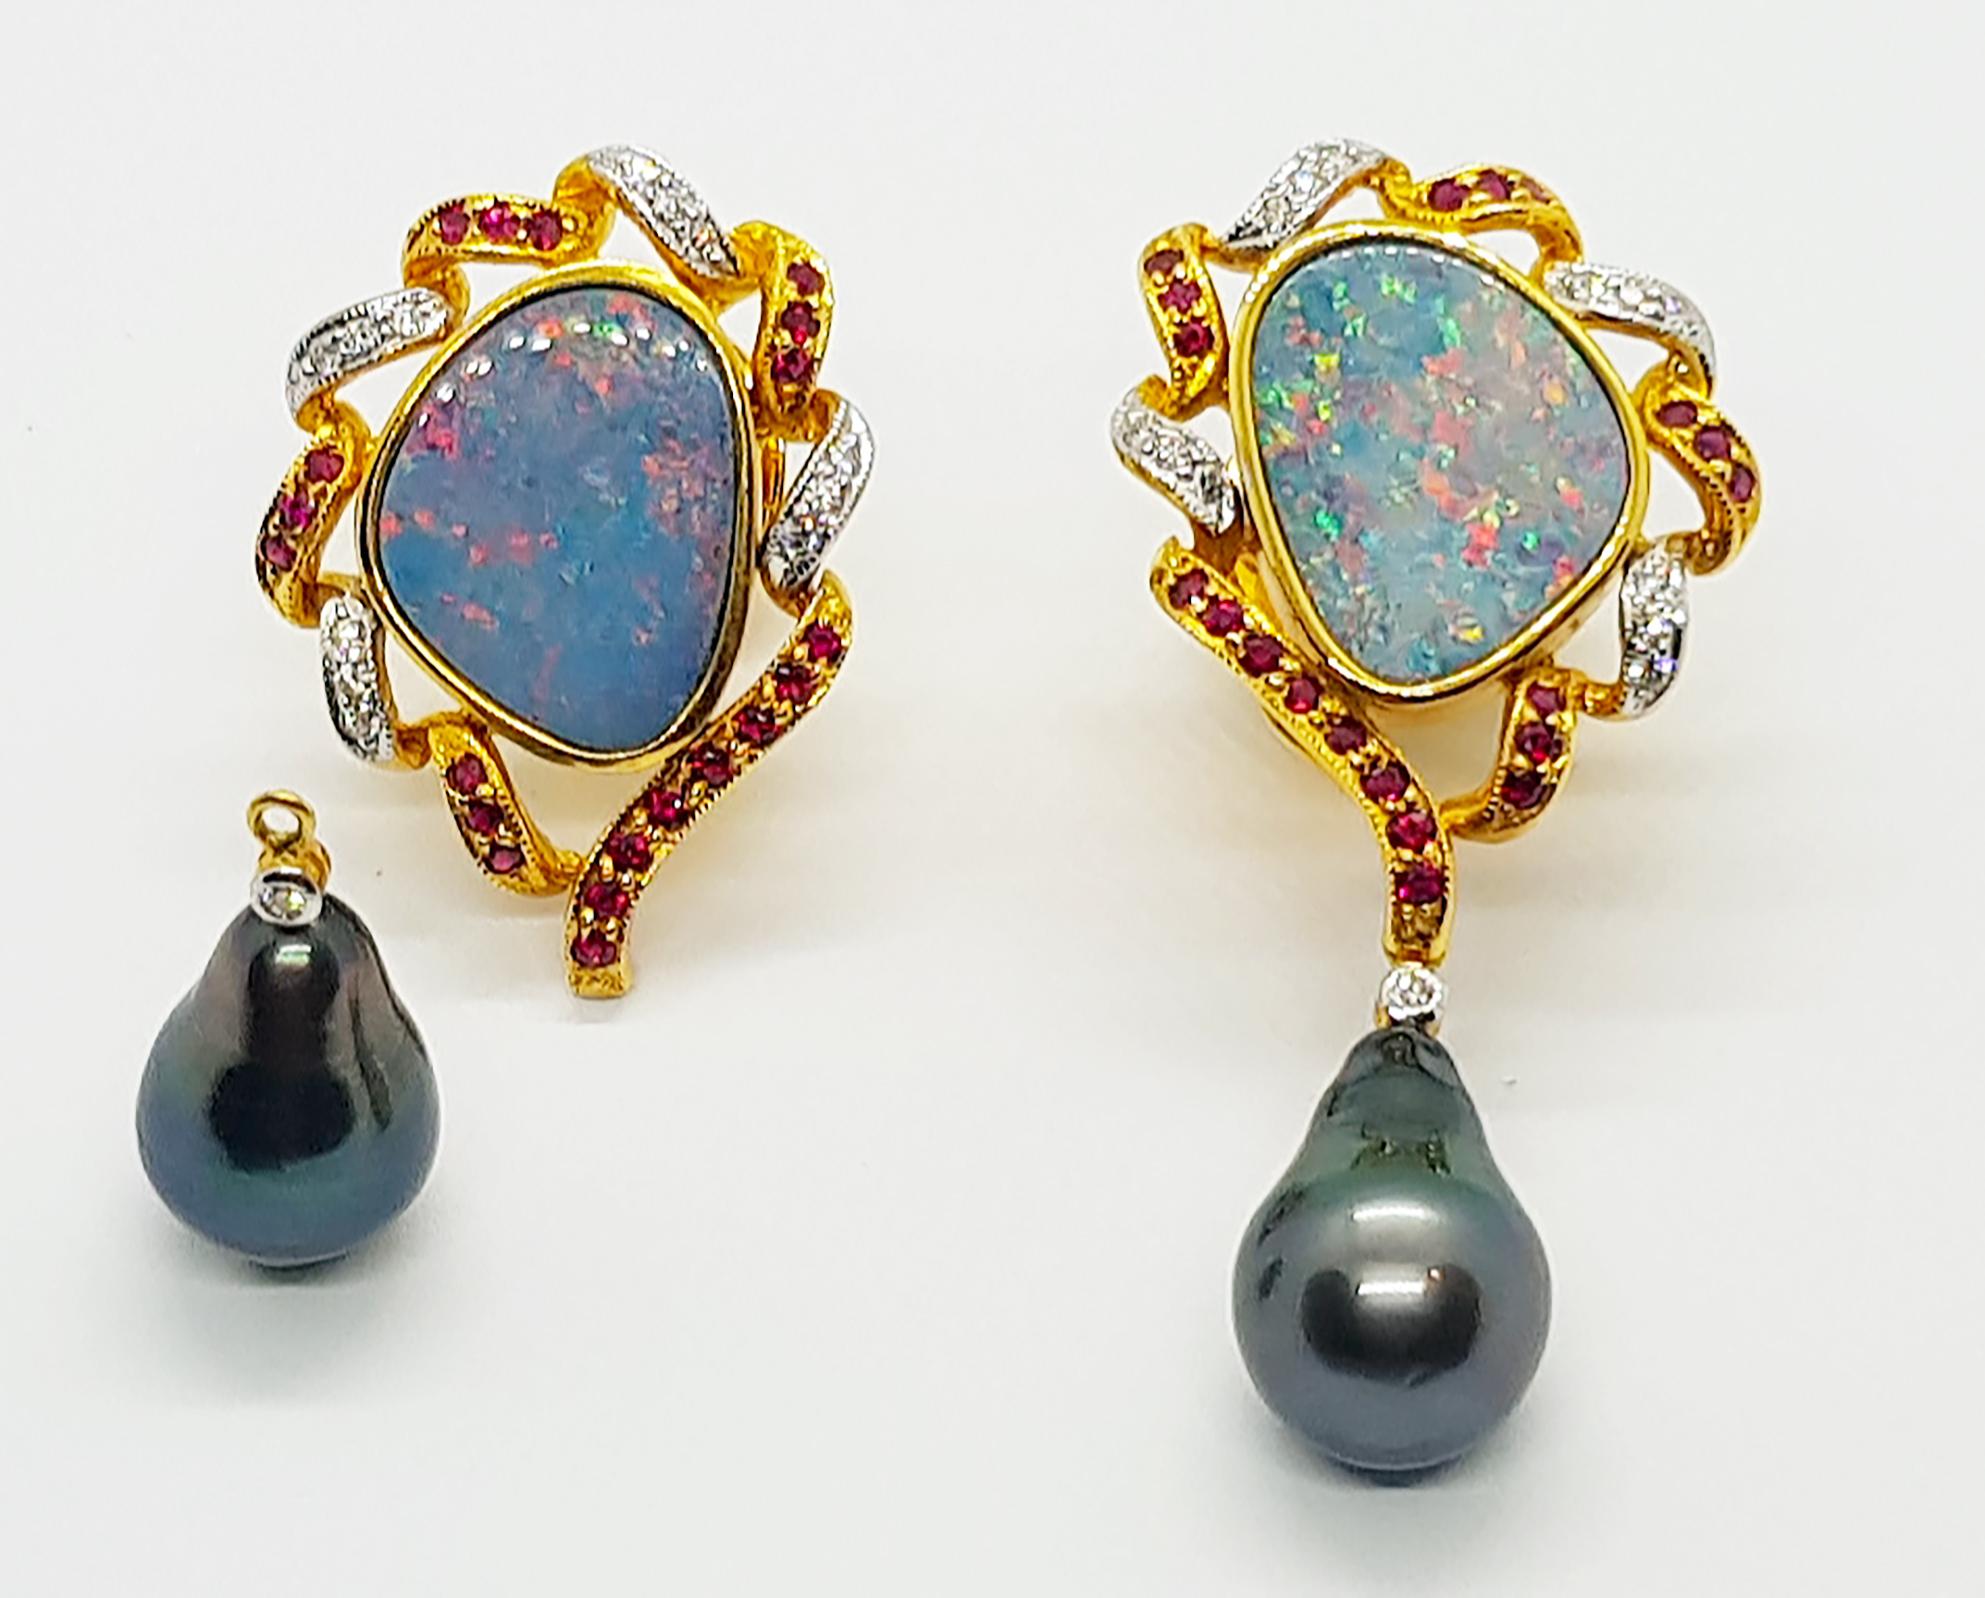 Boulder Opal 11.30 carats with Ruby 0.63 carat, Diamond 0.27 carat and South Sea Pearl Earrings set in 18 Karat Gold Settings

Width:  2.0 cm 
Length: 4.5 cm
Total Weight: 19.74 grams

